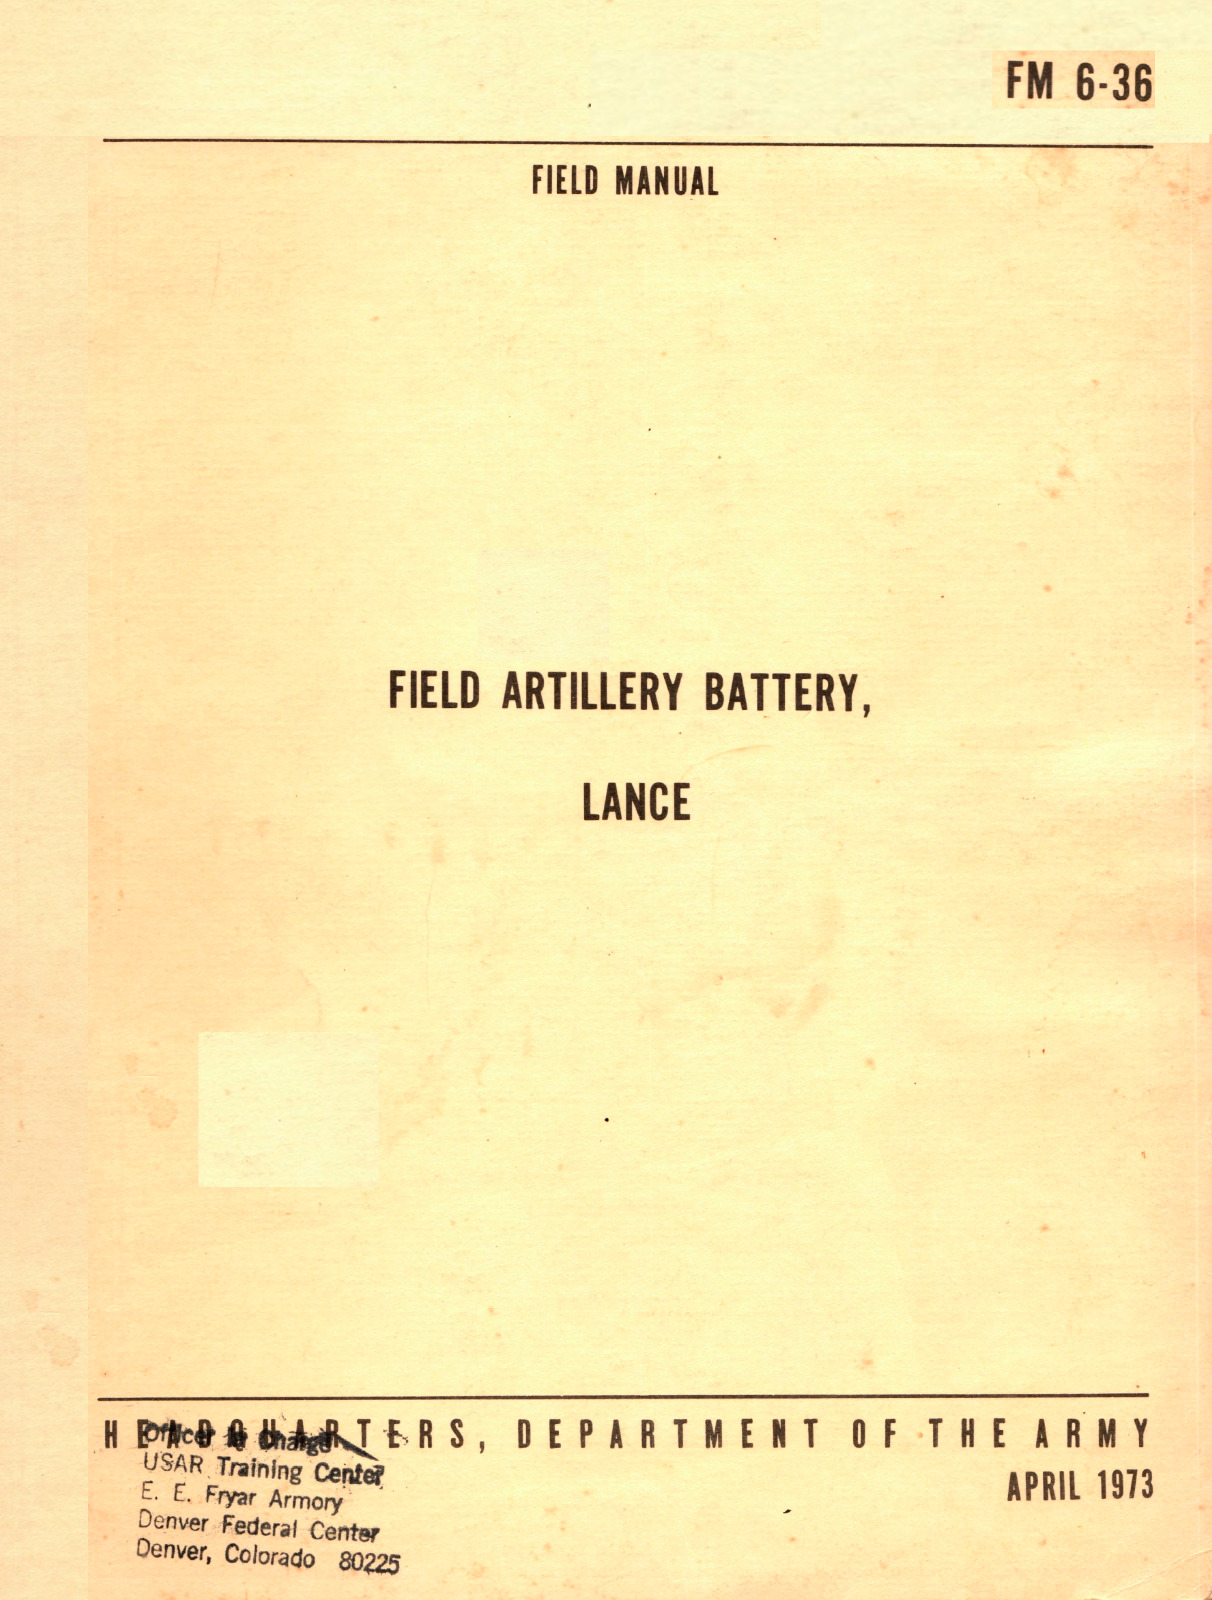 92 Page 1973 FM 6-36 FIELD ARTILLERY BATTERY LANCE Army Missile Book on Data CD